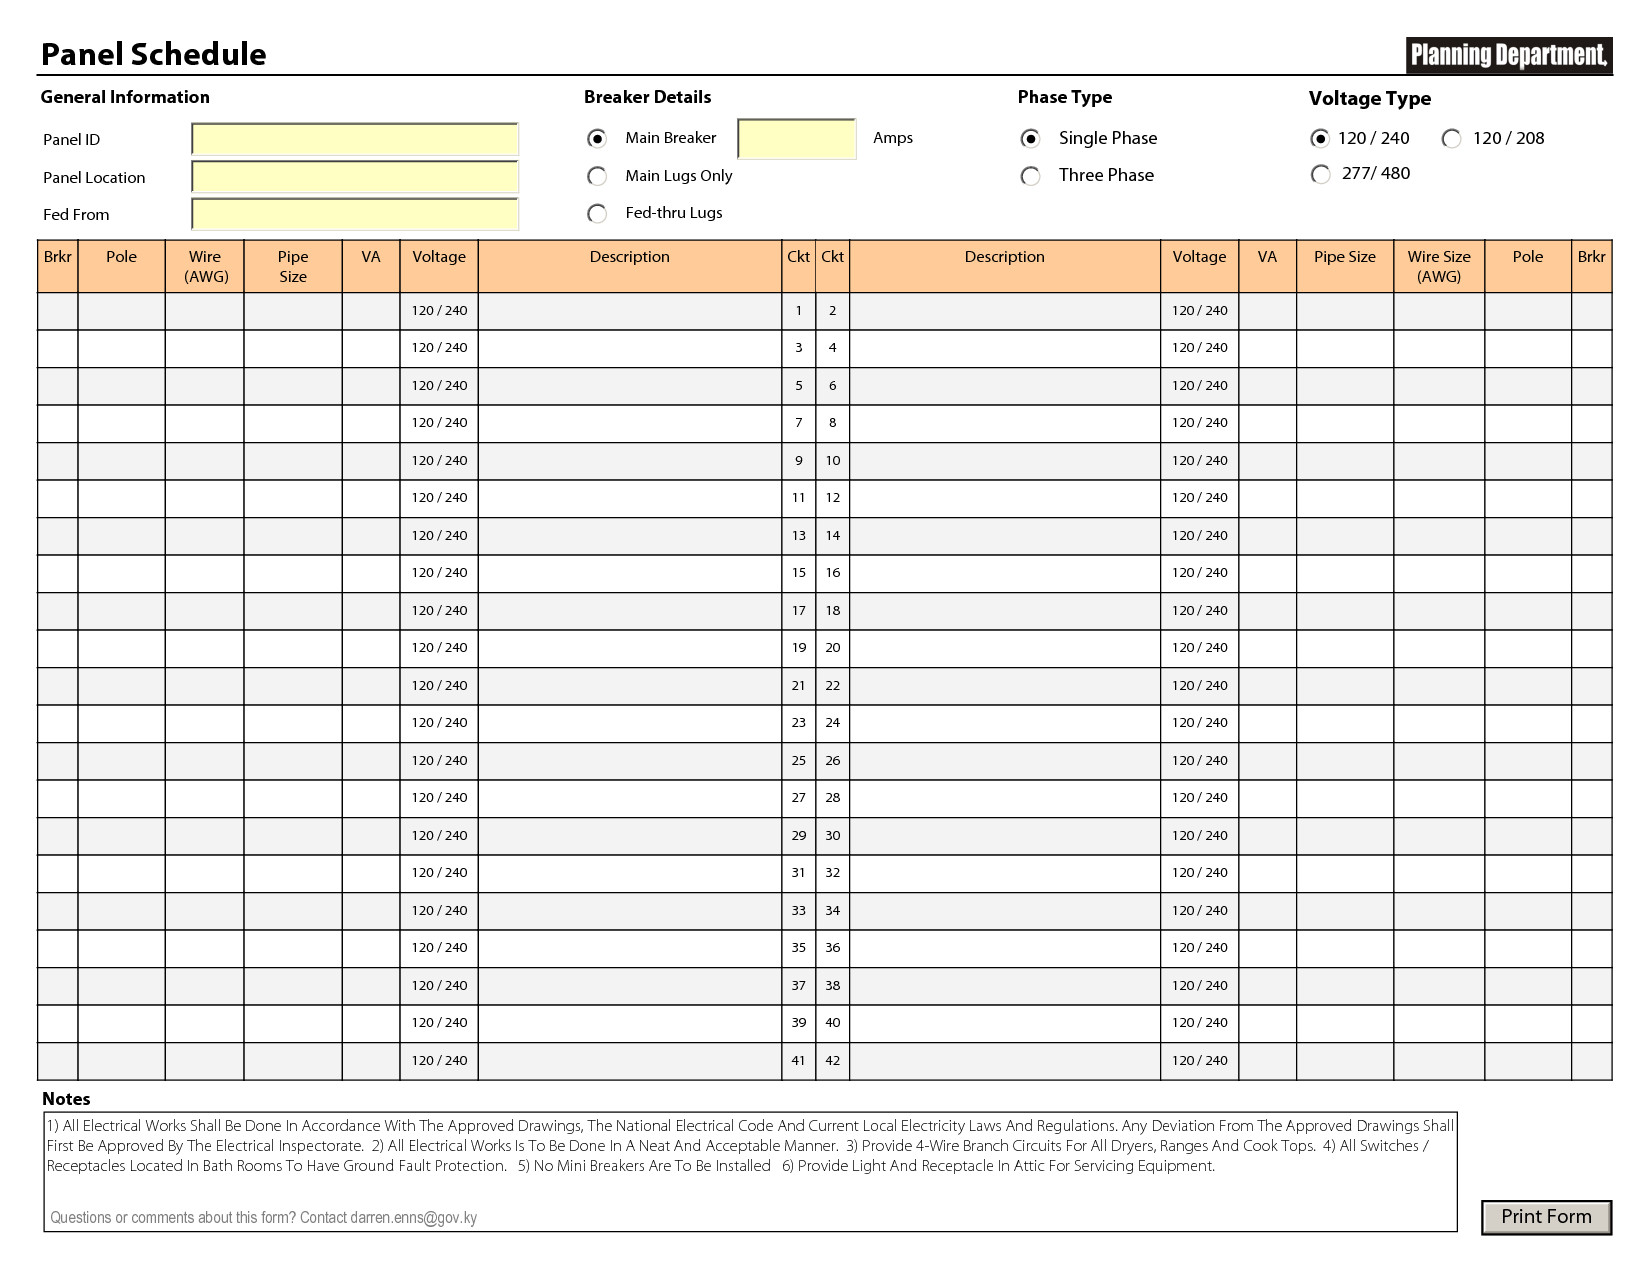 Electrical Panel Schedule Templates tespin